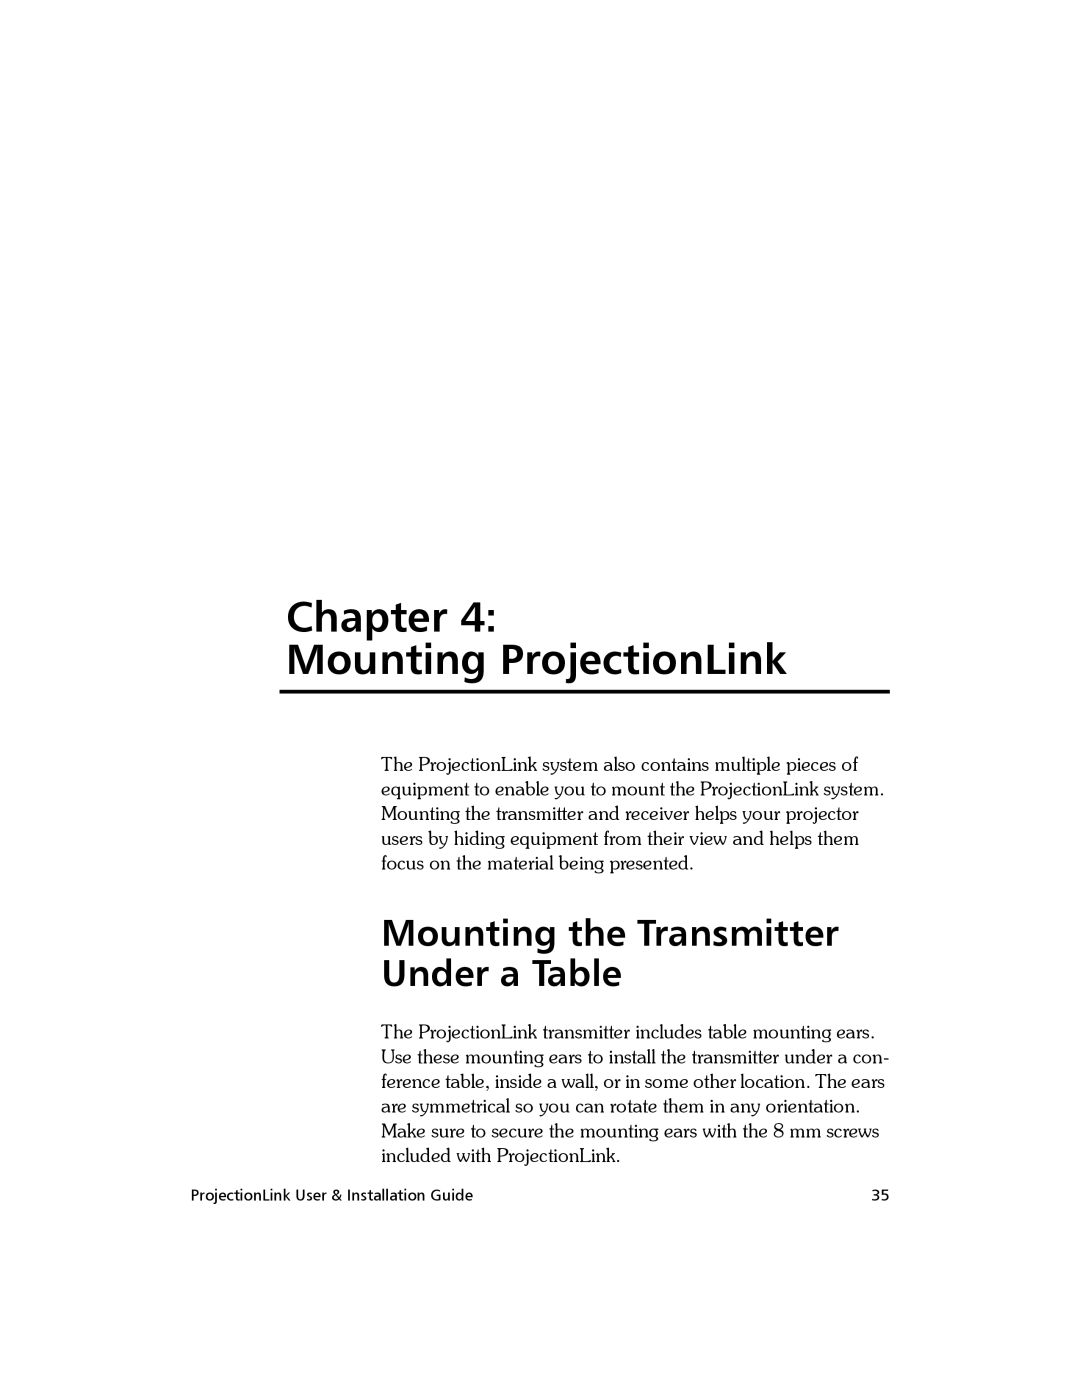 Proxima ASA BNDL-001, PL-300E manual Chapter Mounting ProjectionLink, Mounting the Transmitter Under a Table 